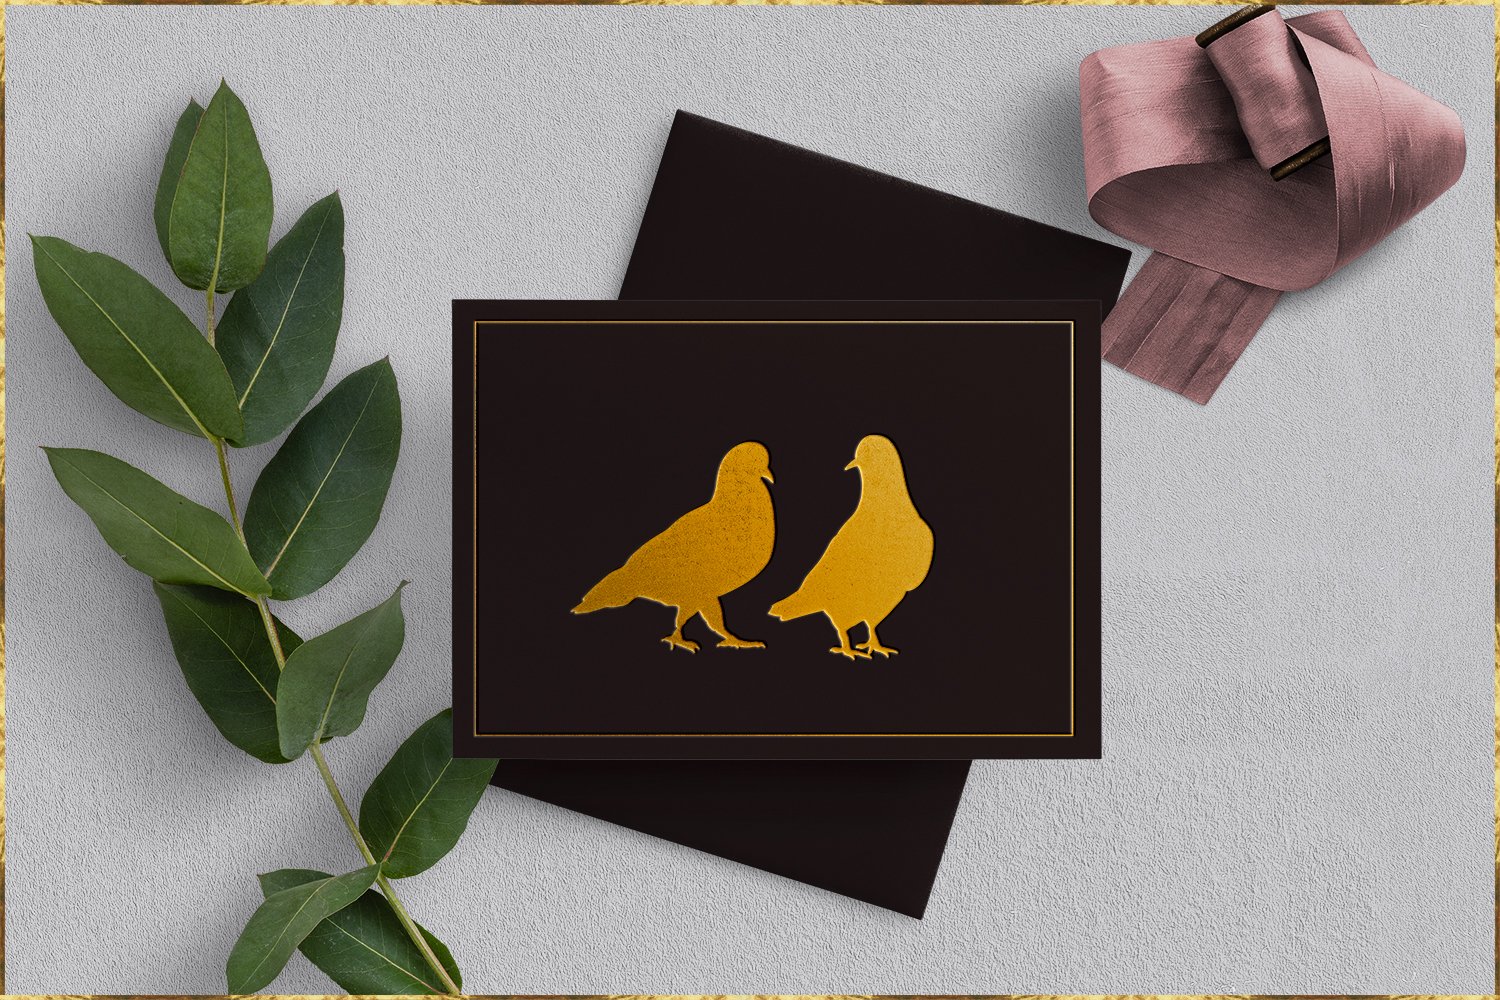 Pictures with gold print of birds.